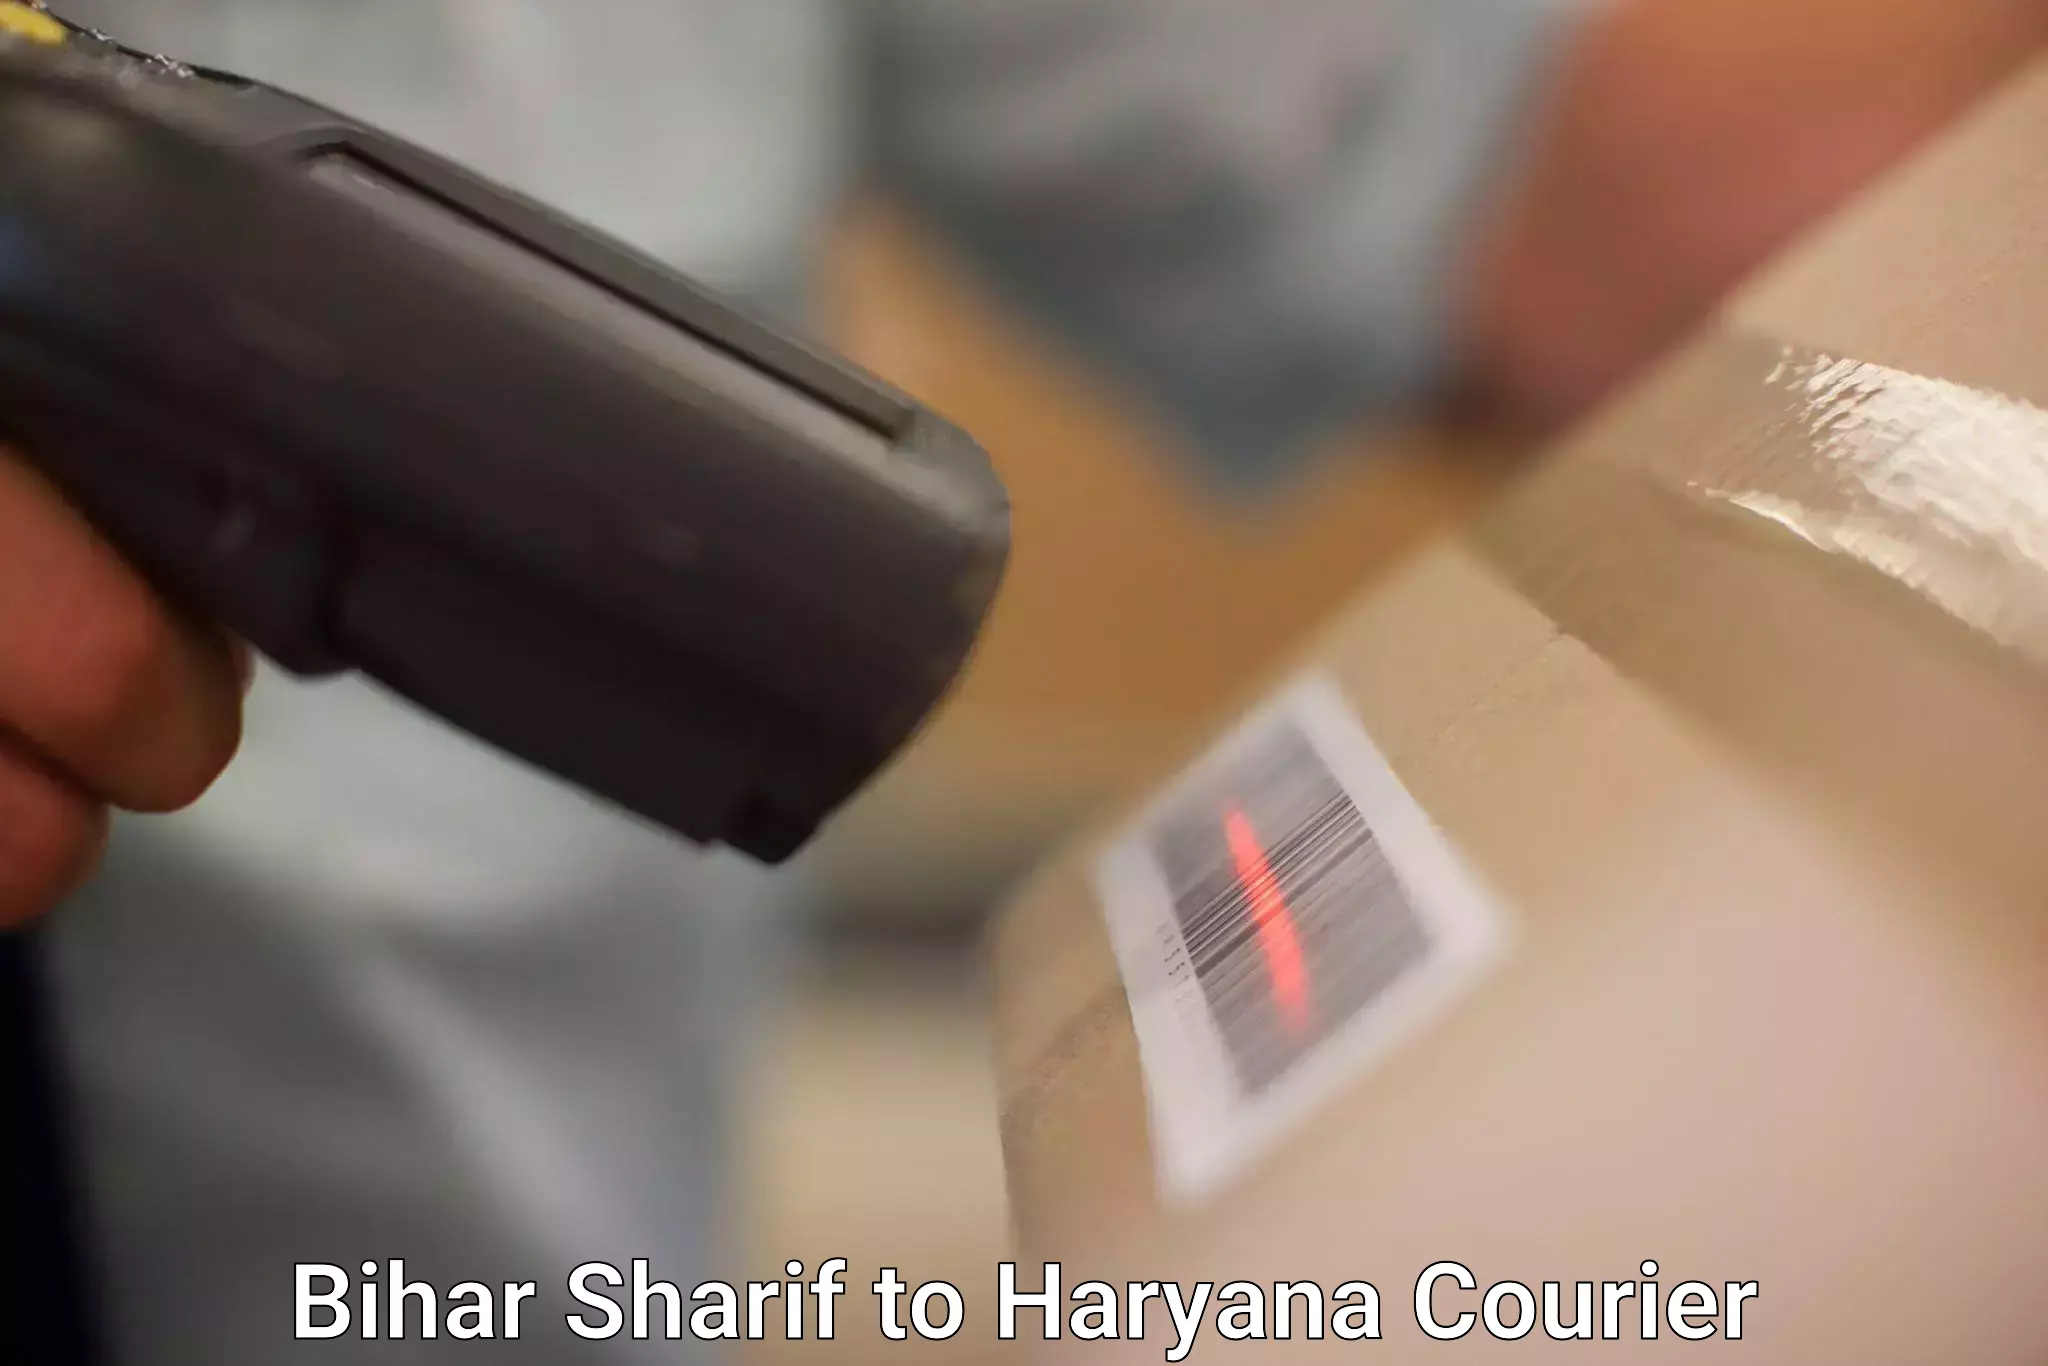 Small business couriers Bihar Sharif to Chaudhary Charan Singh Haryana Agricultural University Hisar